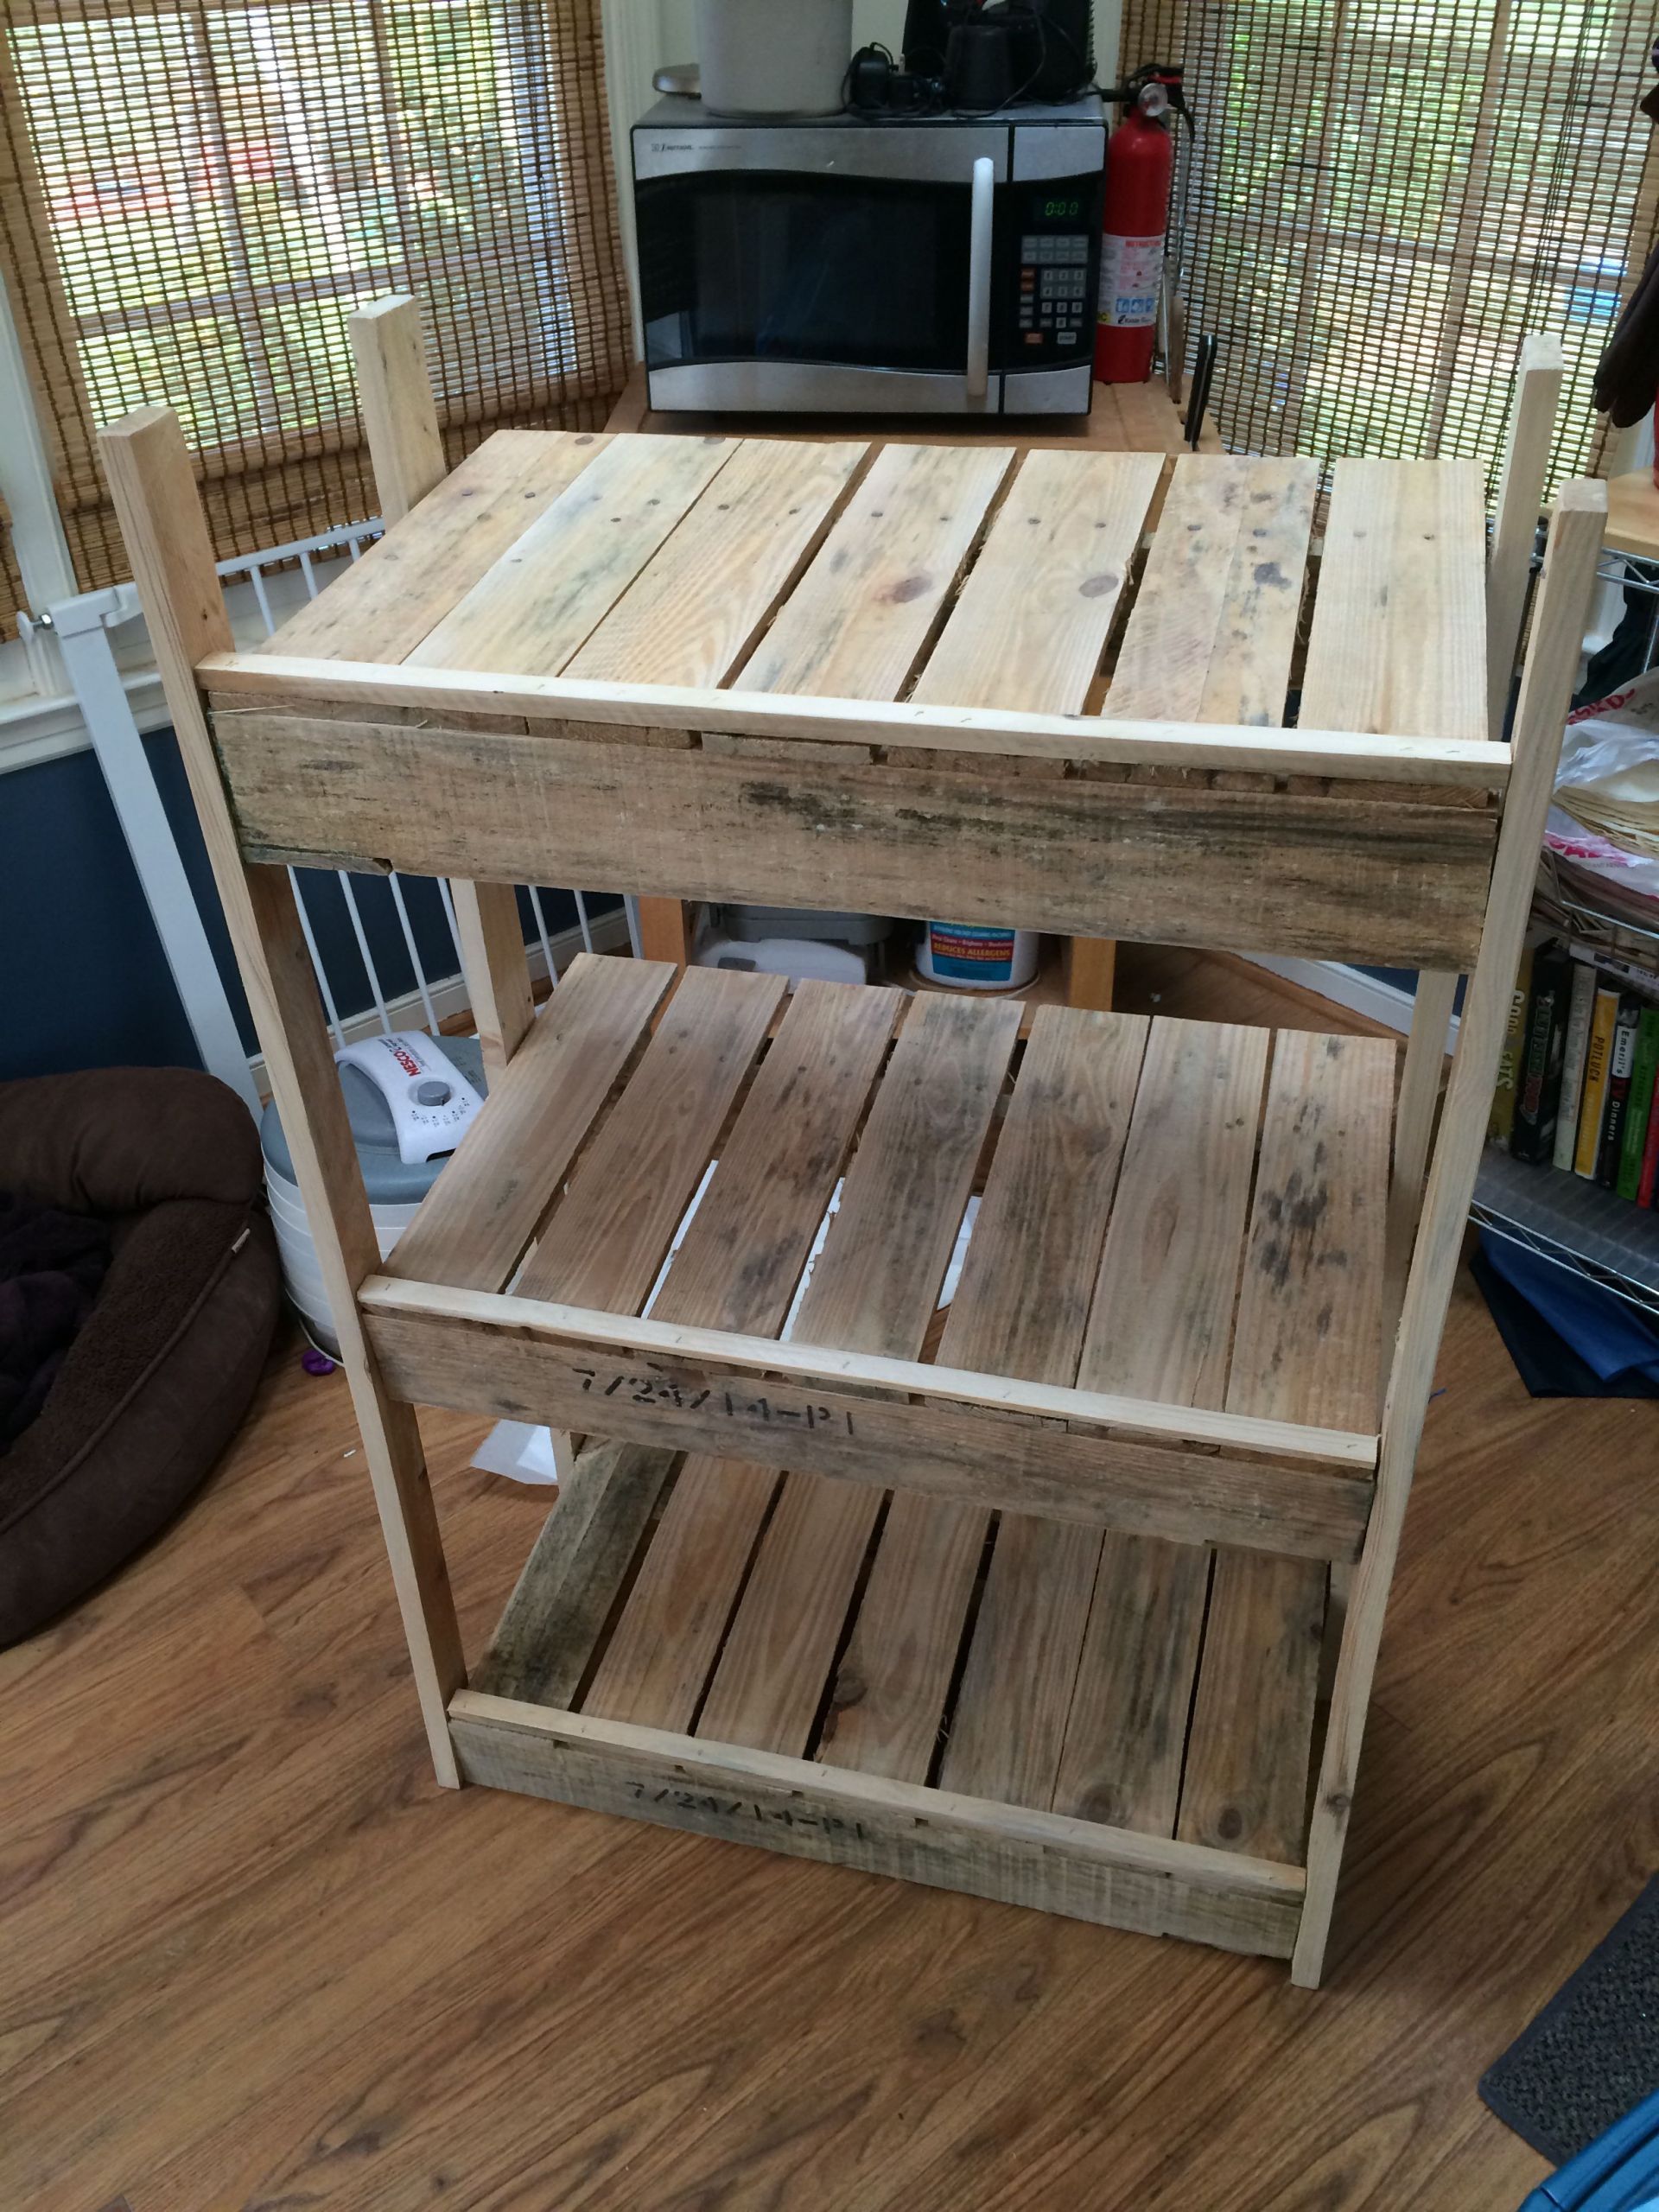 Laundry Basket Rack DIY
 Tiered laundry basket holder made from recycled pallets